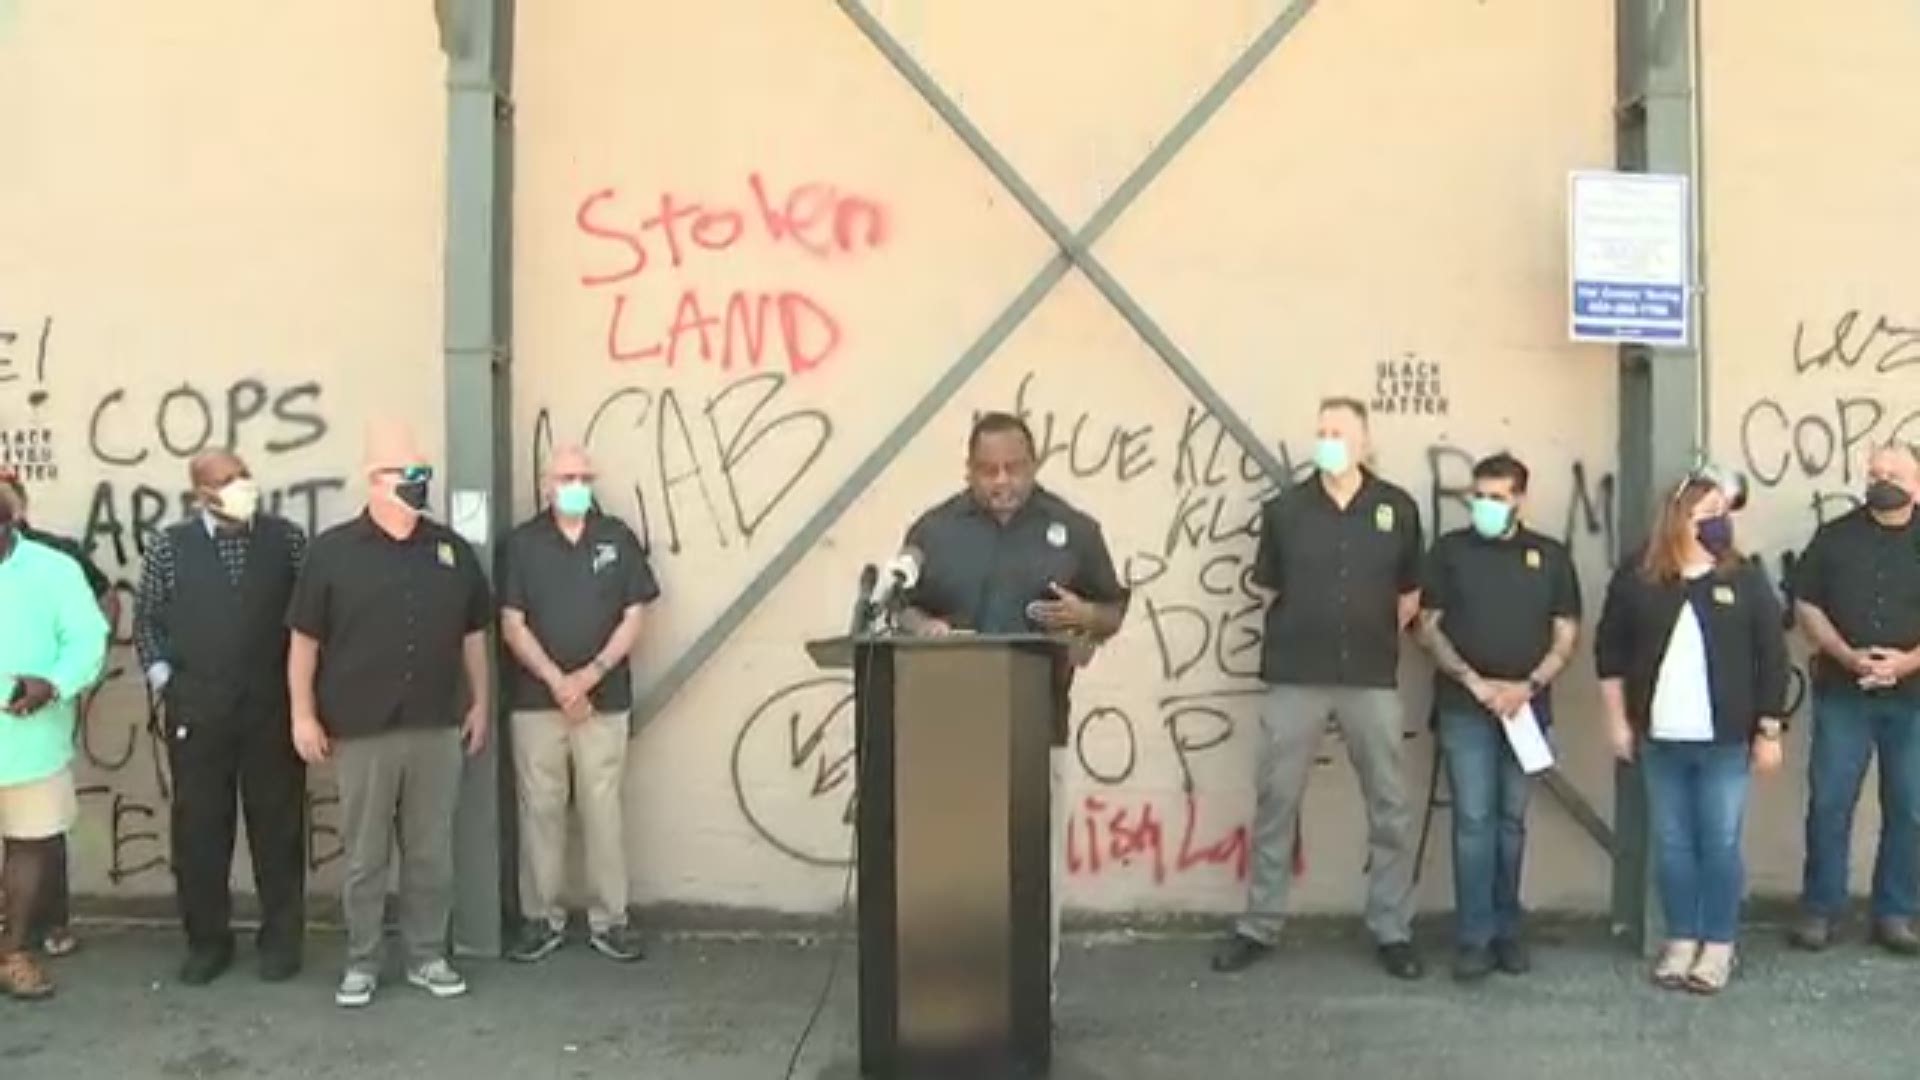 The Portland Police Association, along with representatives from the community called for an end to destruction and called on protesters to meet with them.